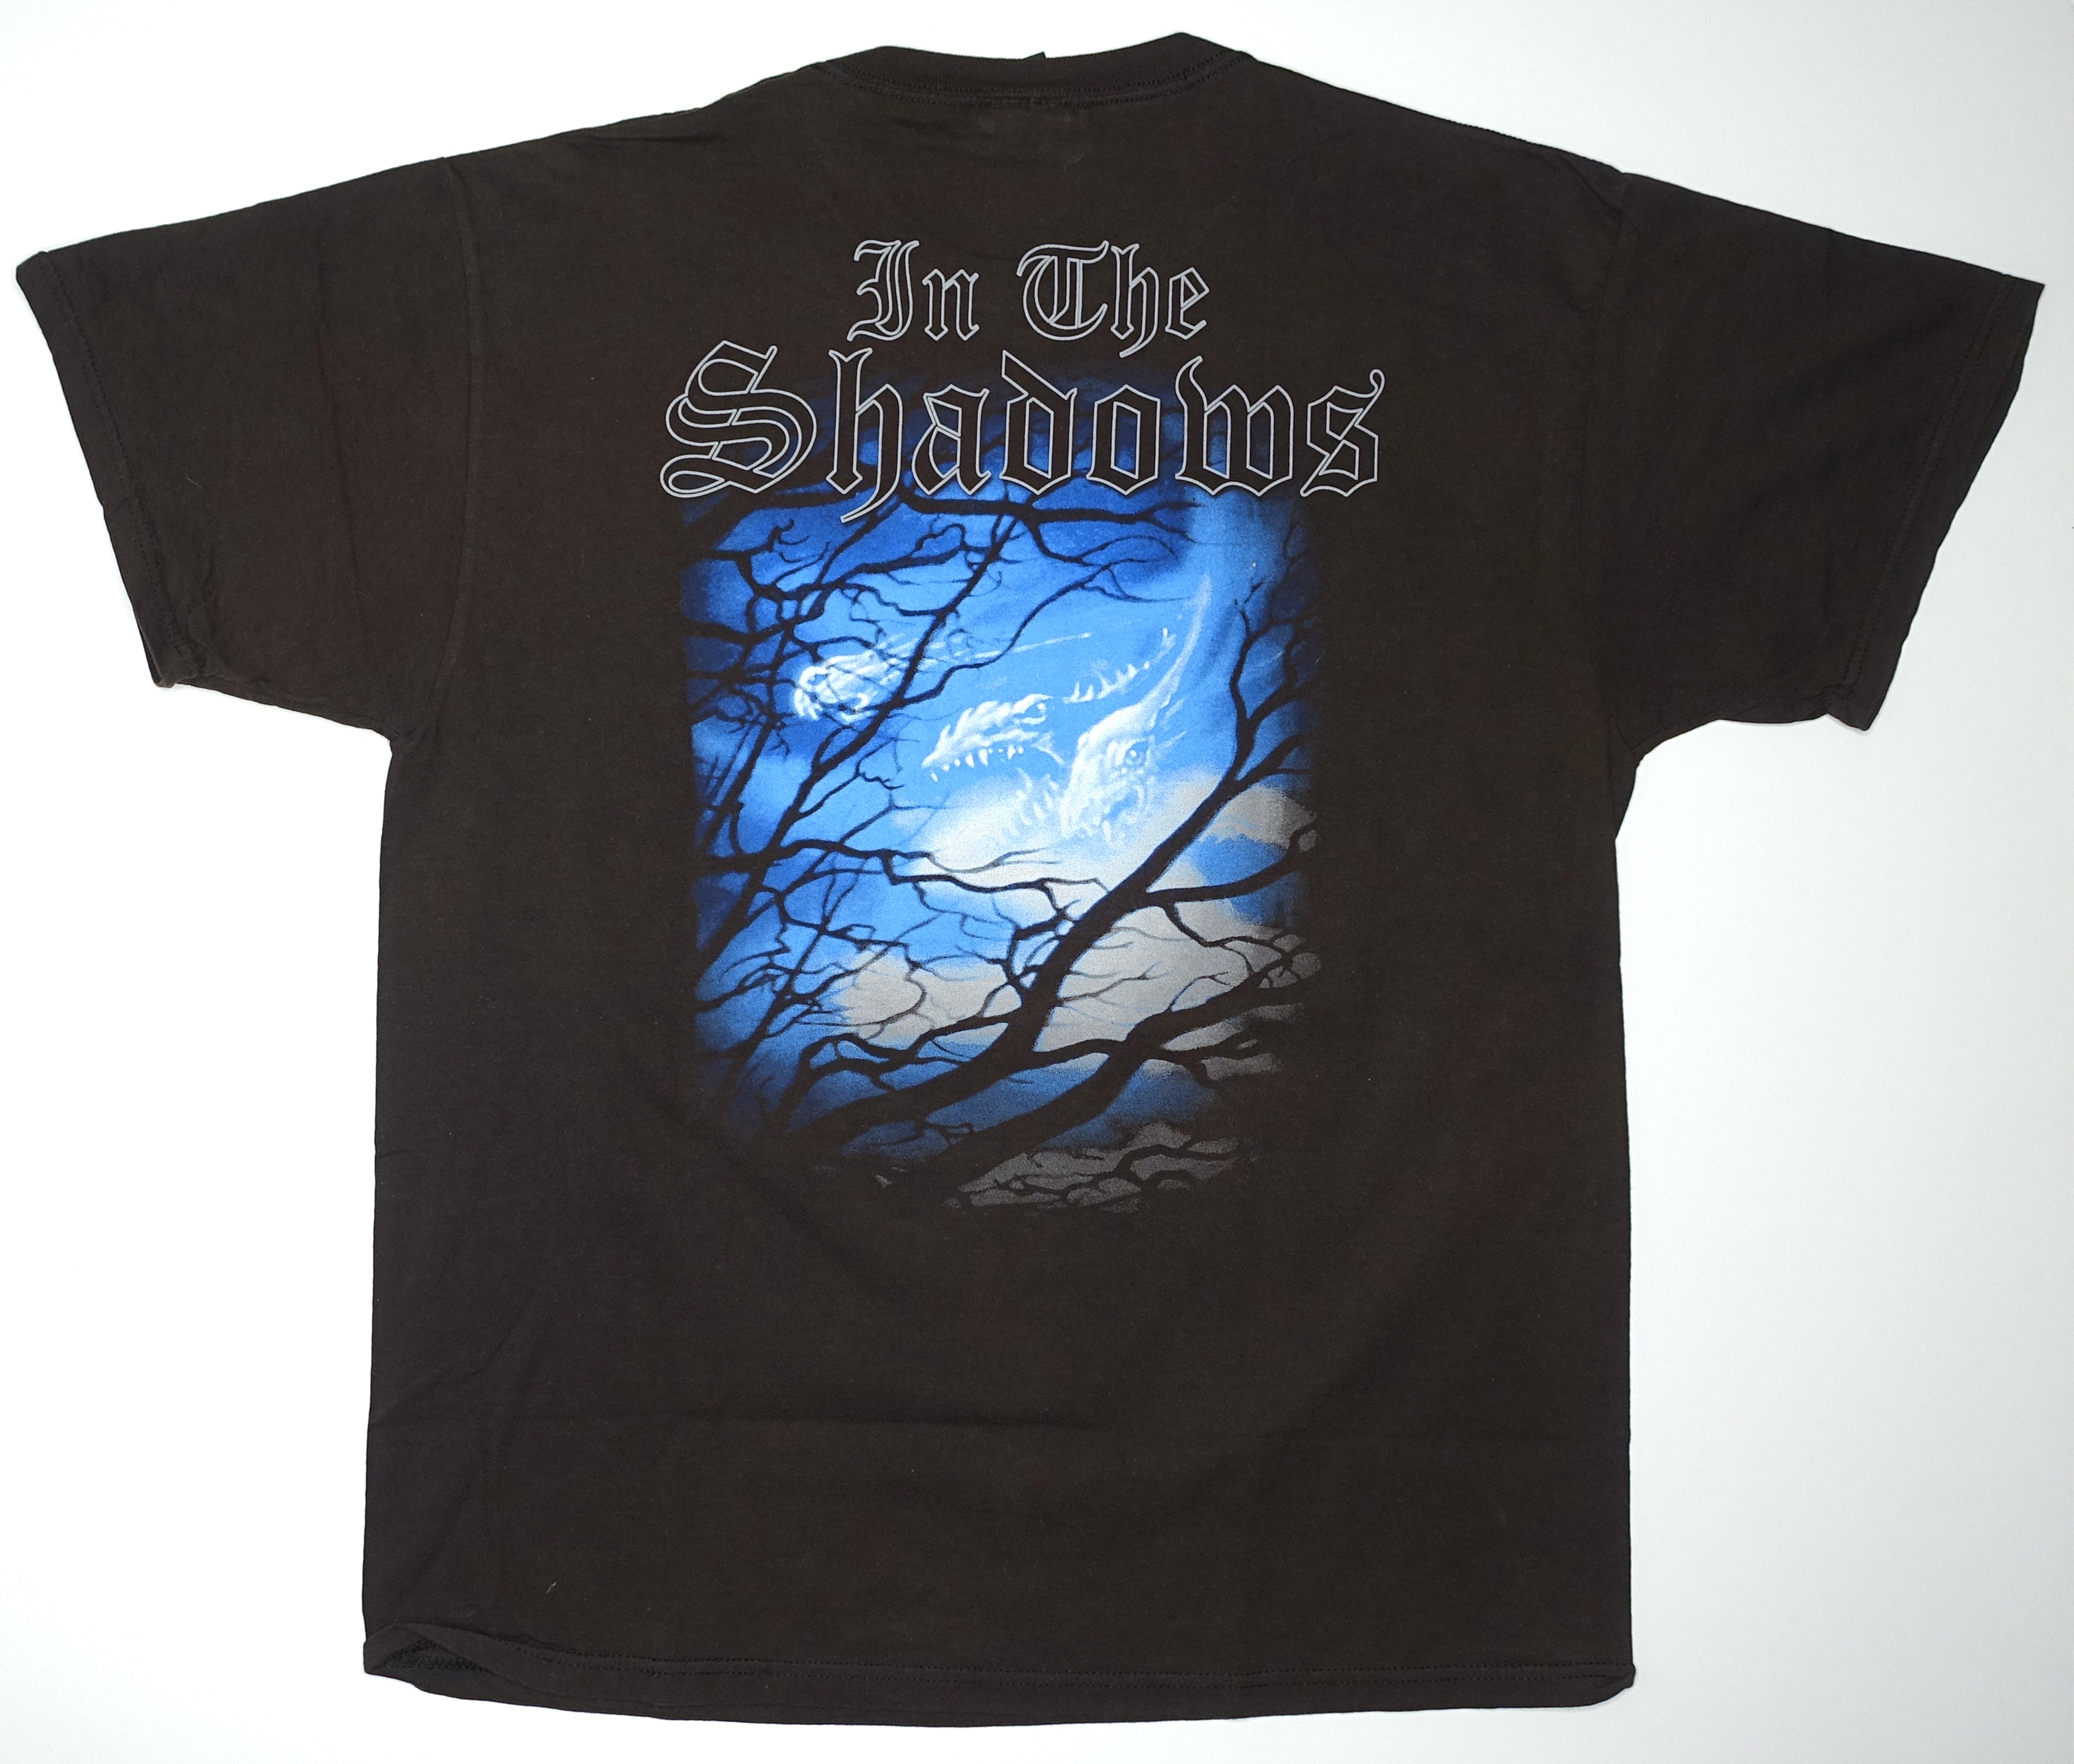 Mercyful Fate – In The Shadows Tour Shirt Size Large